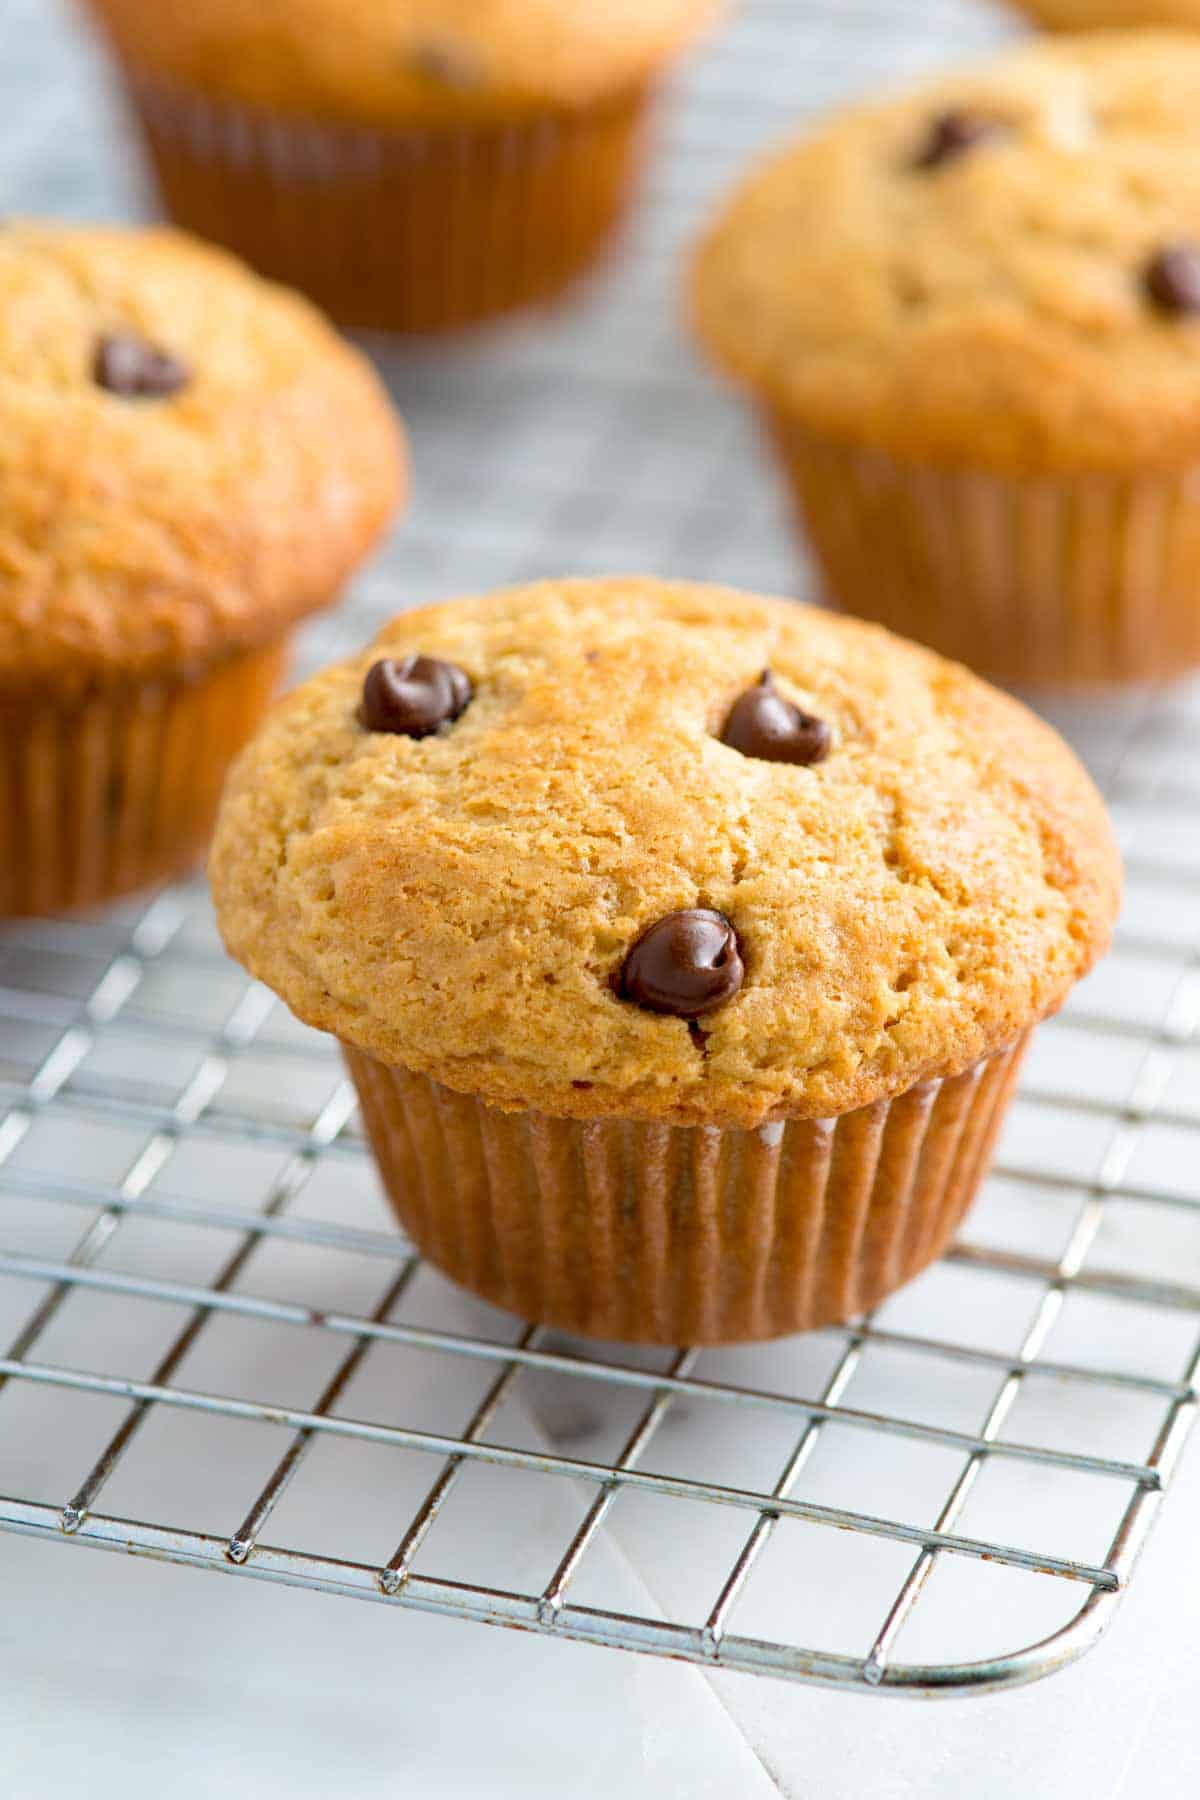 Muffins with chocolate chips